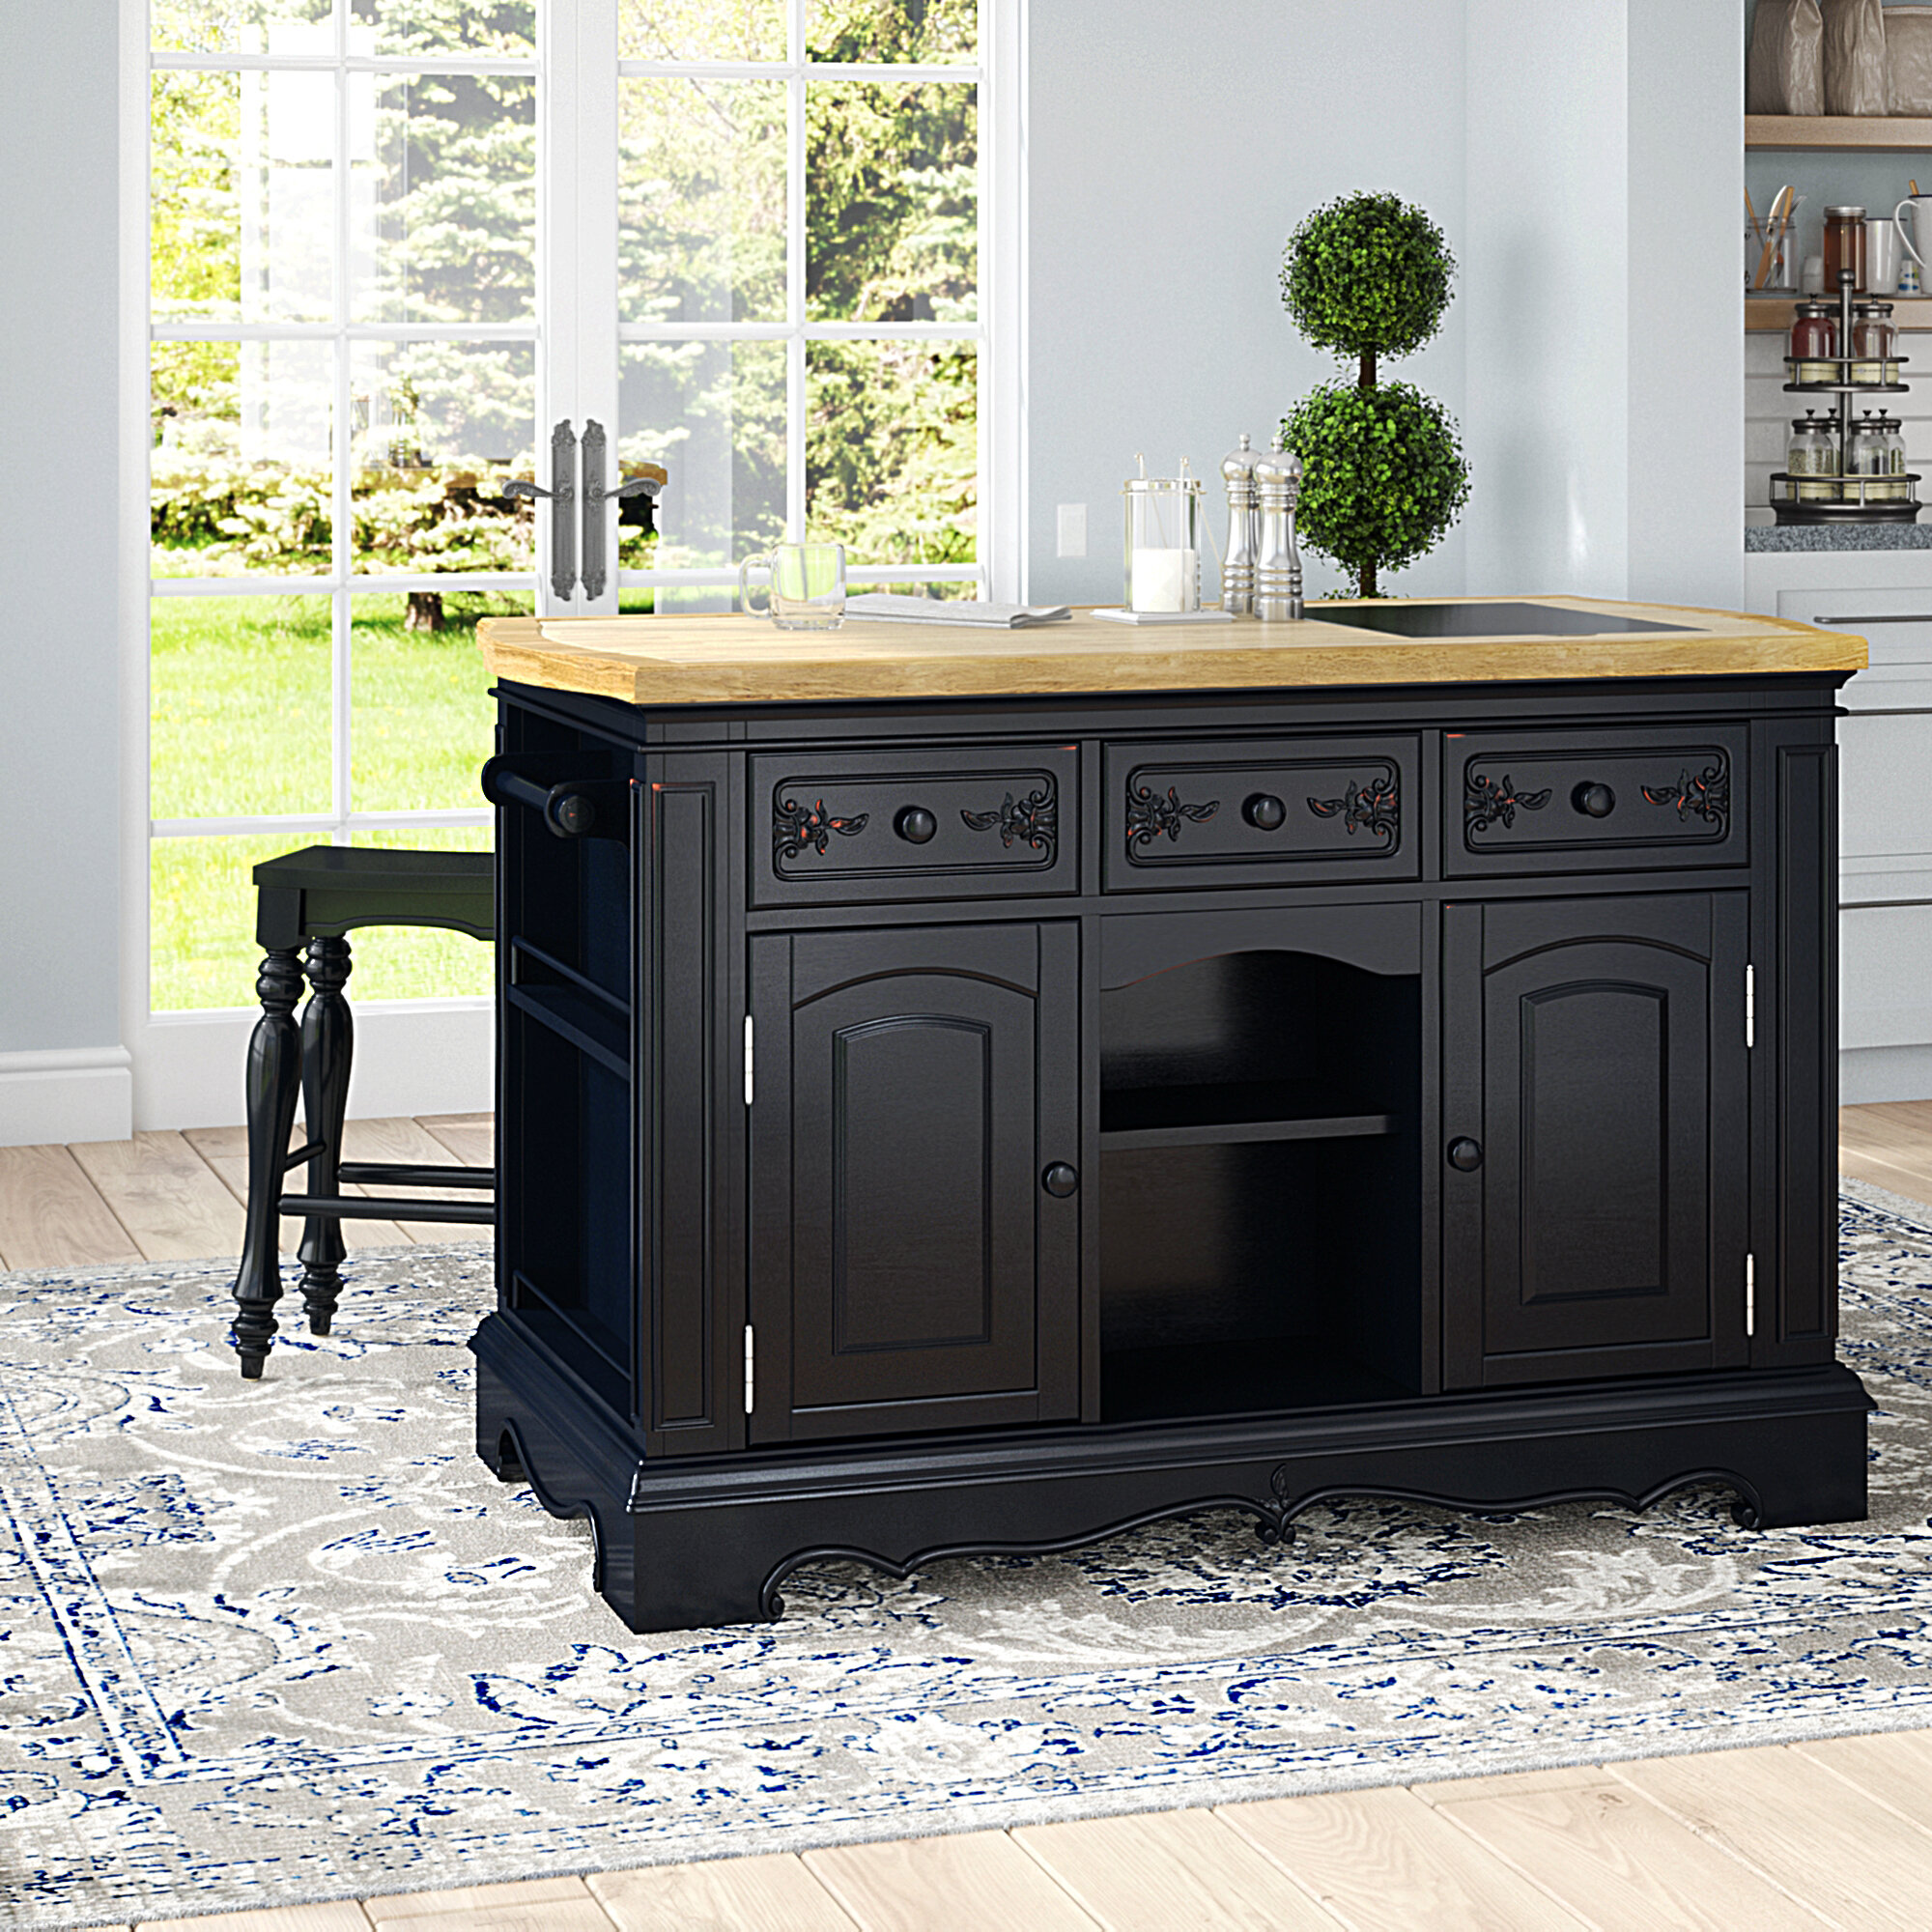 Wayfair   Large Kitchen Islands & Carts You'll Love in 20